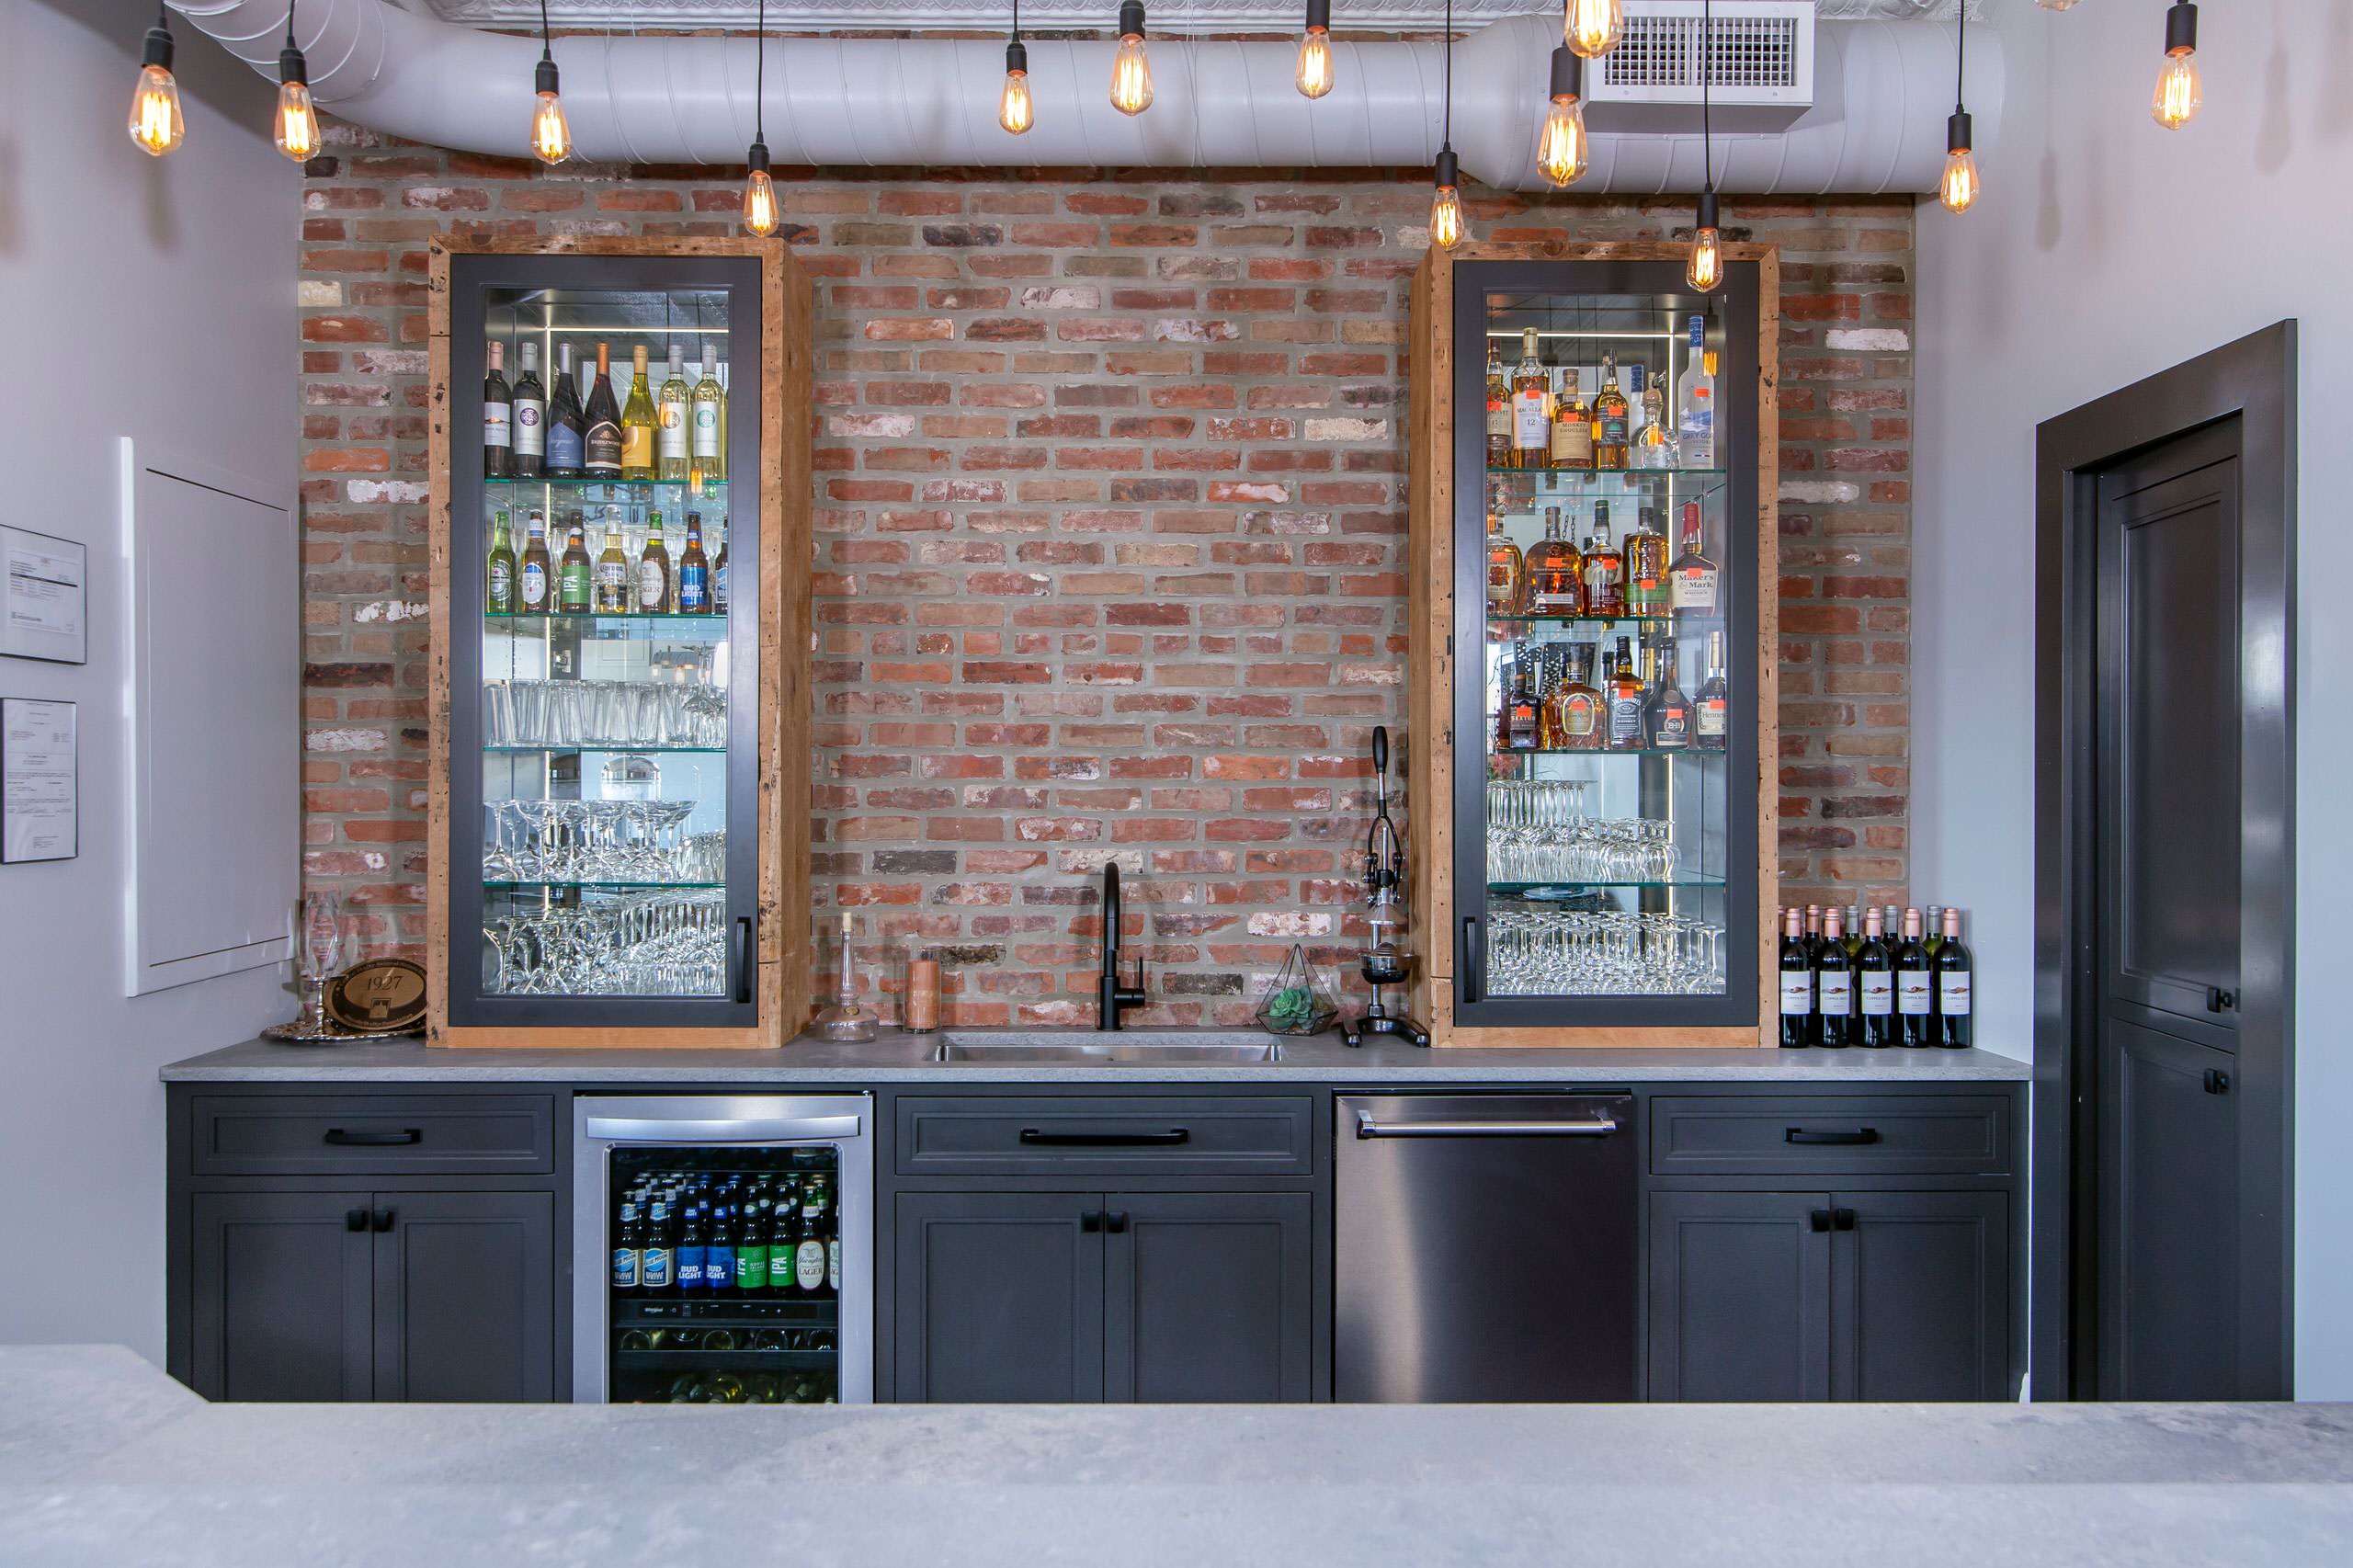 Reclaimed Wood Bar Design Ideas, Pictures, Remodel and Decor